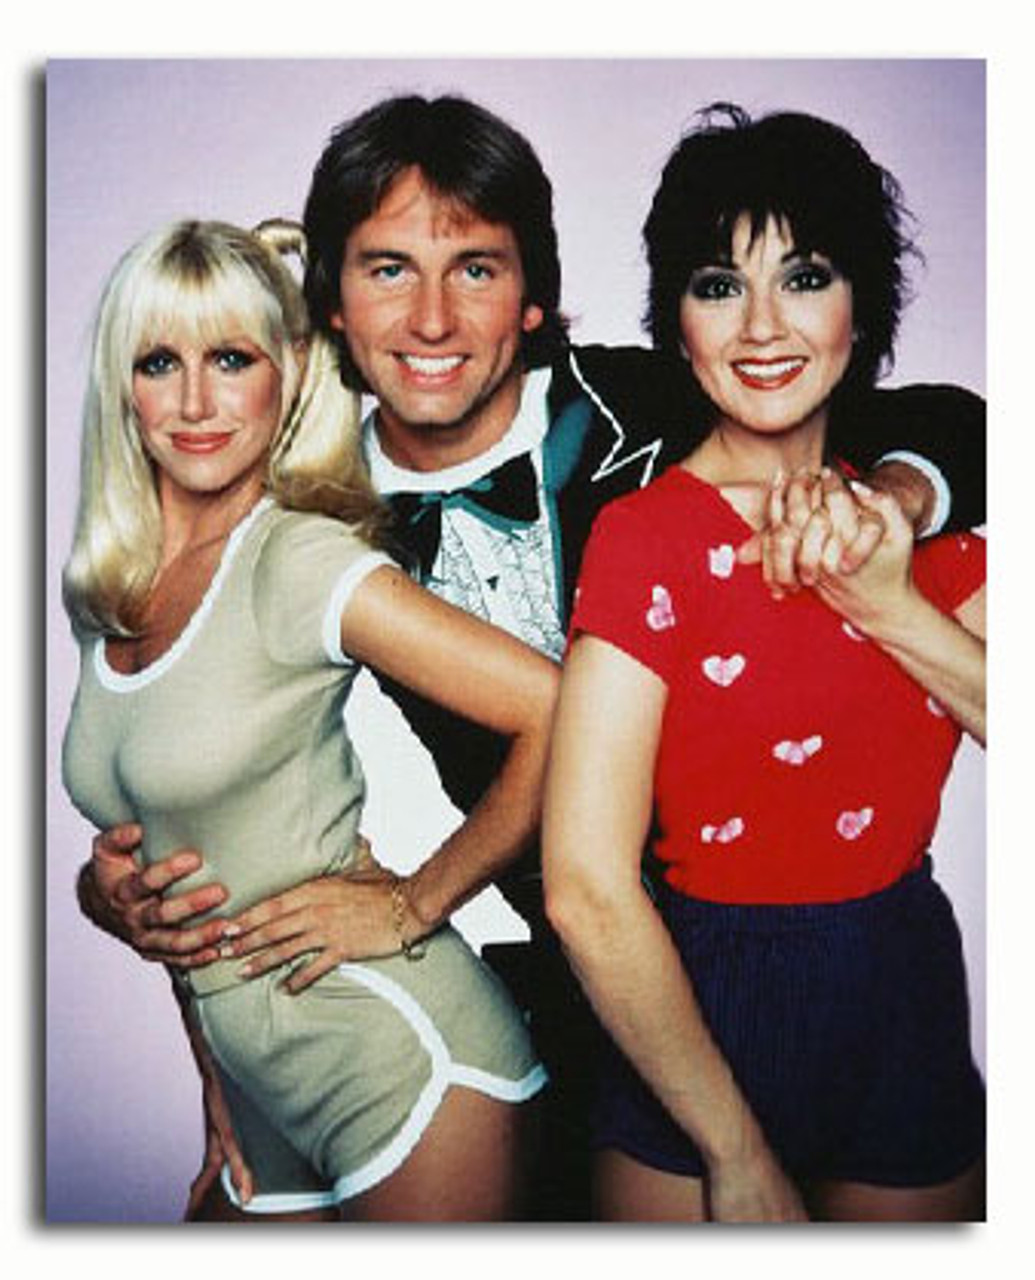 ss3133598_-_joyce_dewitt_as_janet_wood_dawson_john_ritter_as_jack_tripper_suzanne_somers_as_christmas_chrissy_snow_from_threes_company_poster_or_photograph_buy_now_a__16666__11555.1394494062.jpg